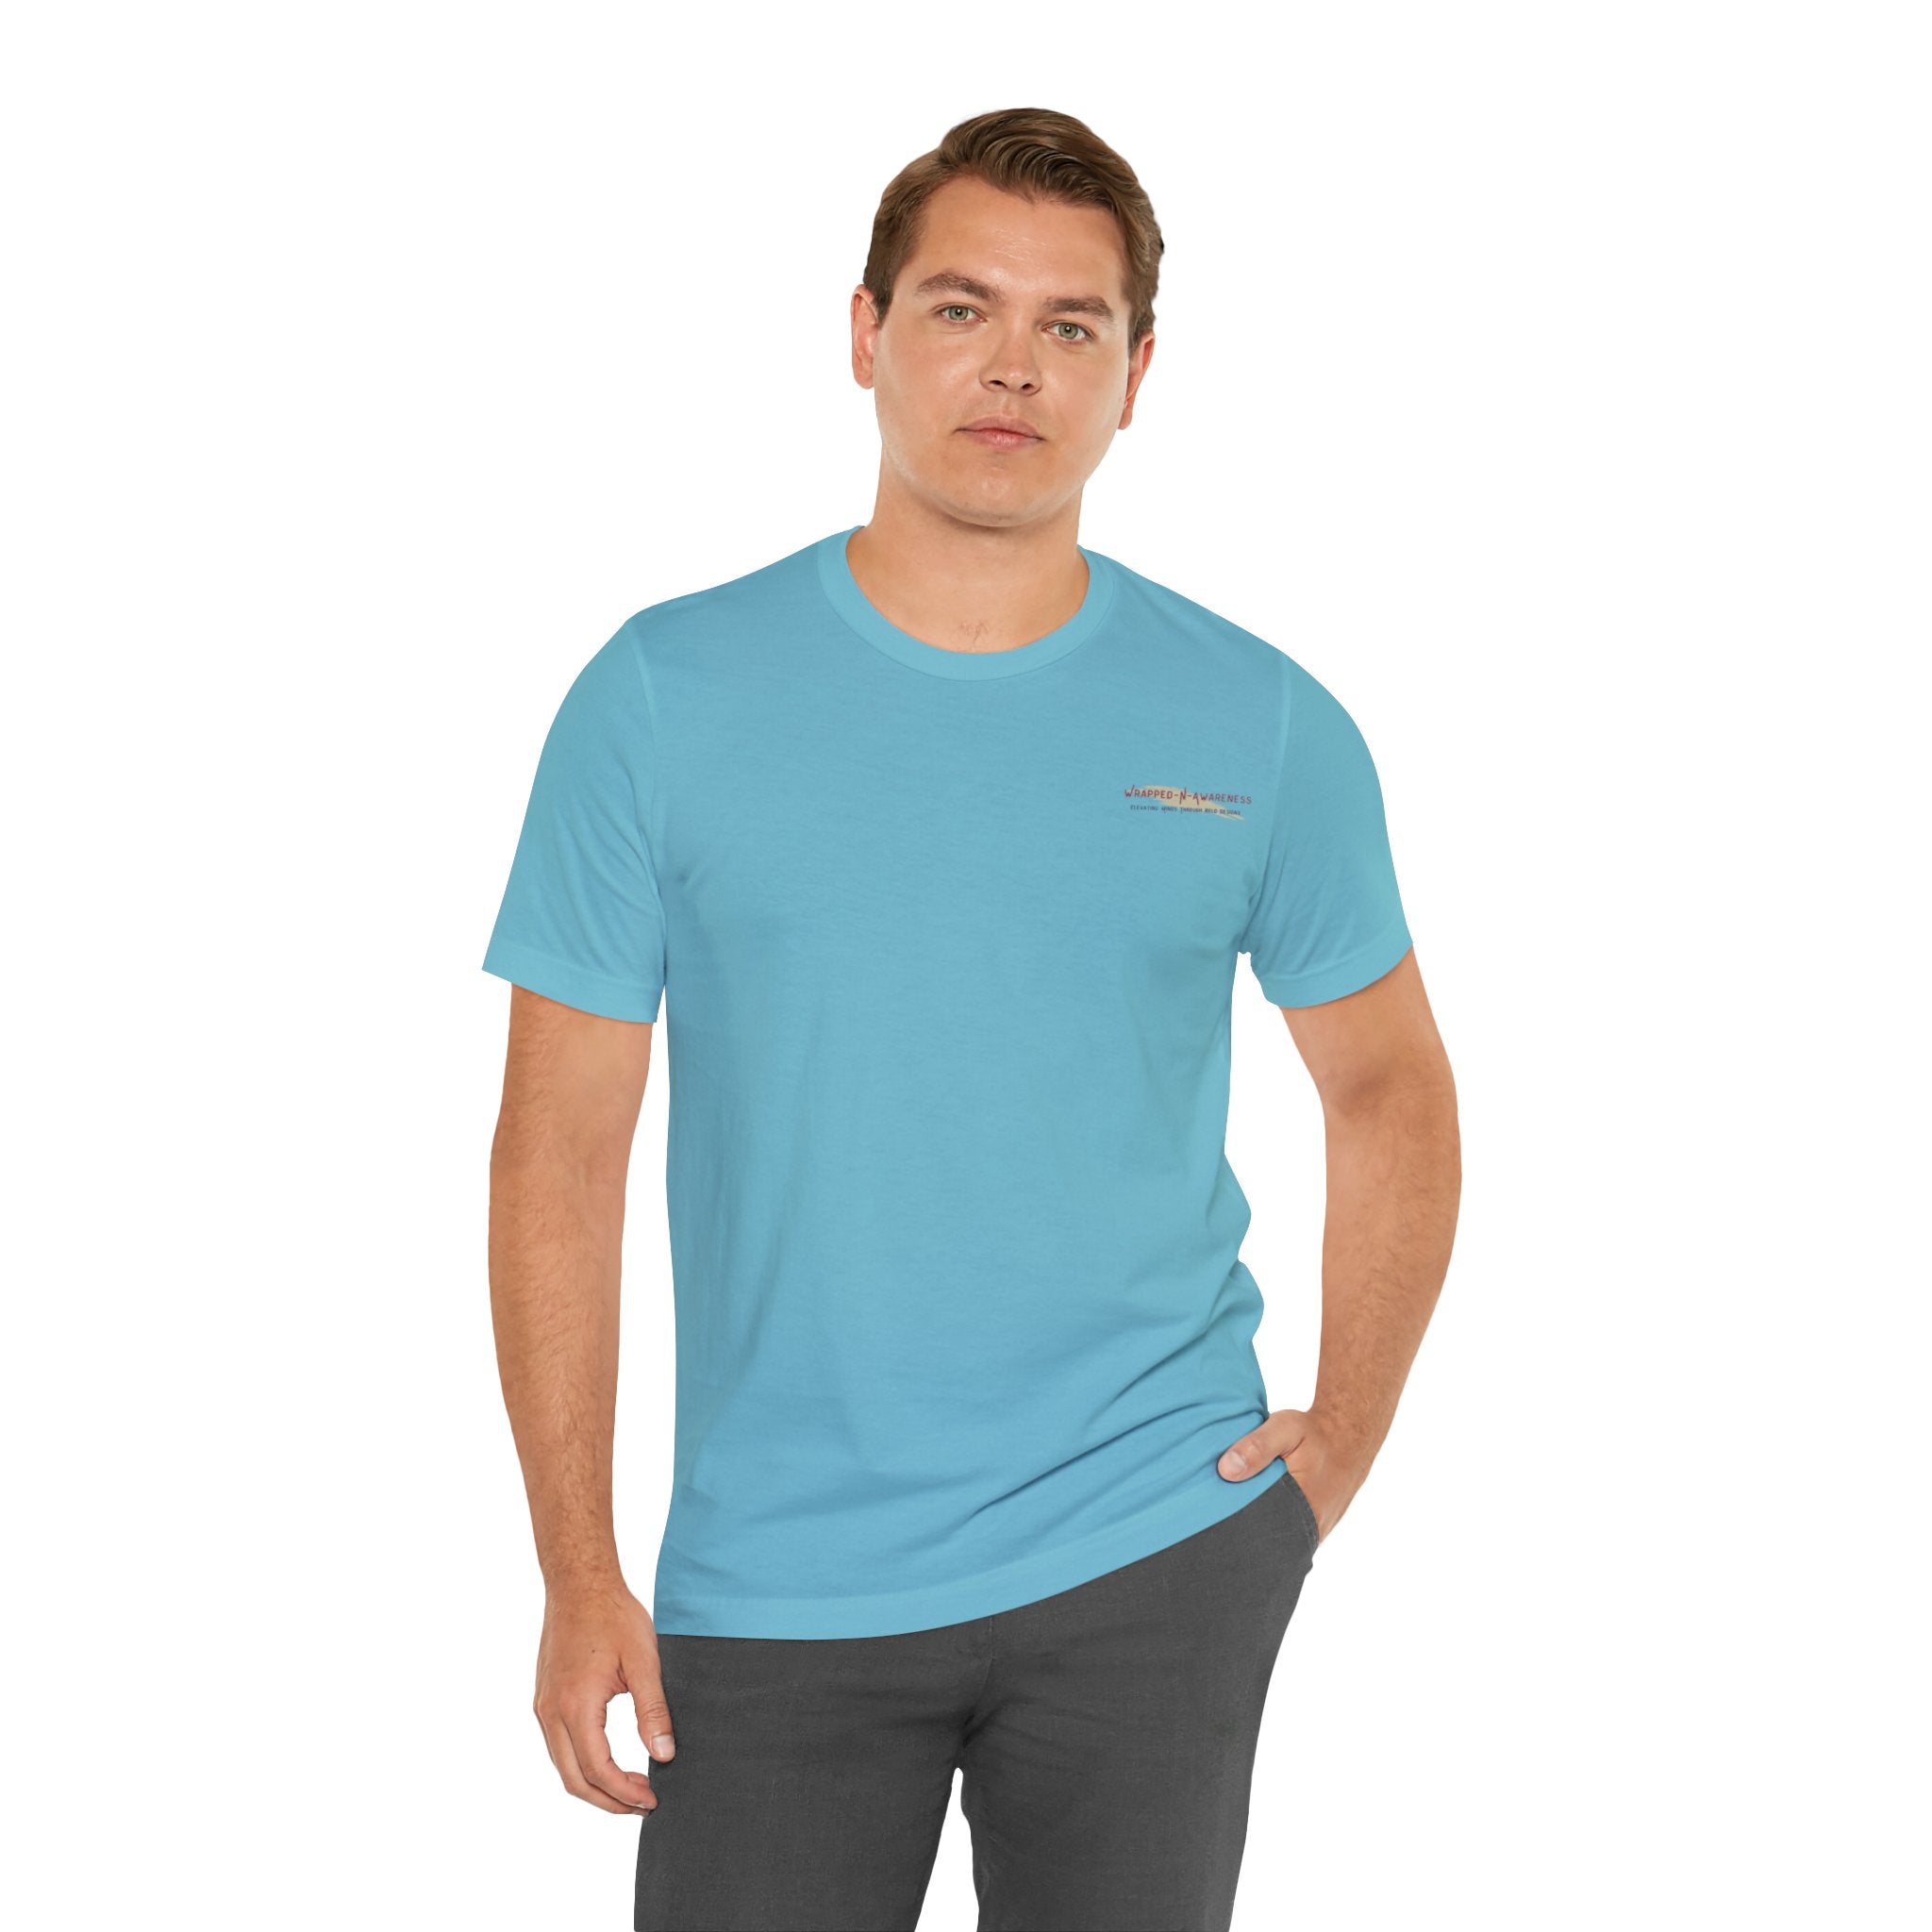 Mindfulness Heals Wounds Tee - Bella+Canvas 3001 Turquoise Airlume Cotton Bella+Canvas 3001 Crew Neckline Jersey Short Sleeve Lightweight Fabric Mental Health Support Retail Fit Tear-away Label Tee Unisex Tee T-Shirt 14216648860065183854_2048 Printify